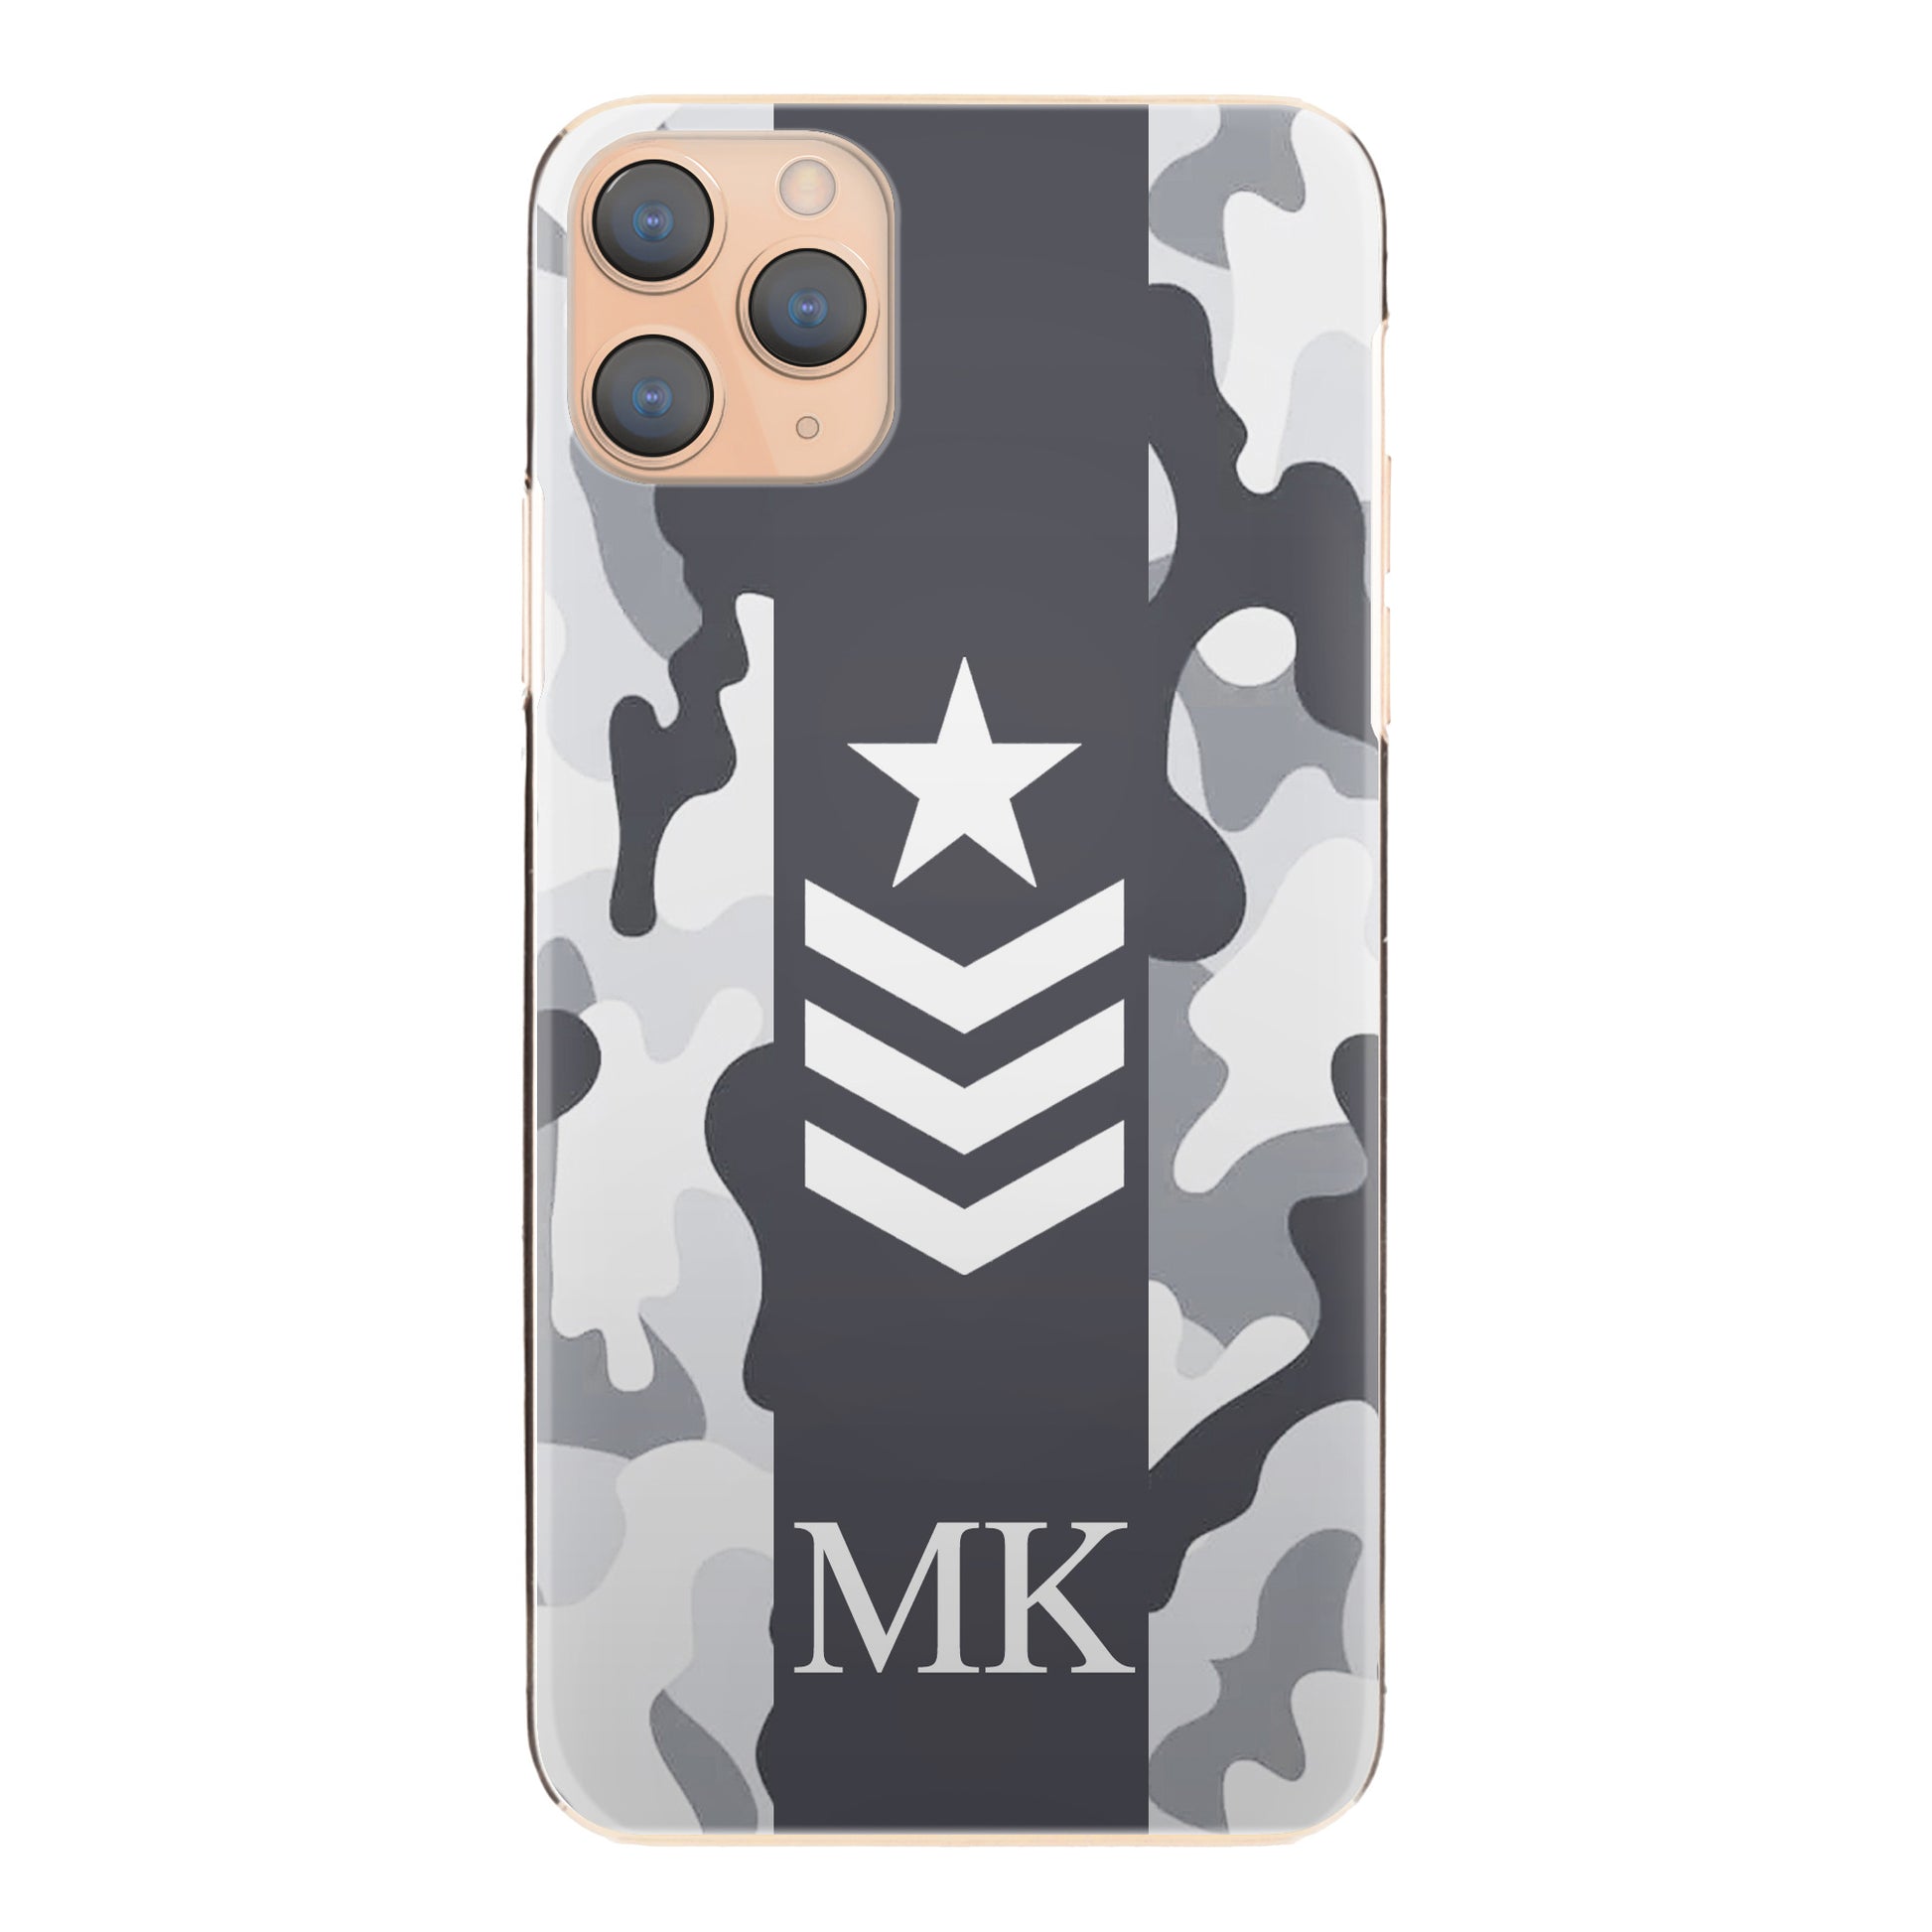 Personalised Huawei Phone Hard Case with Initials and Army Rank on Artic Camo